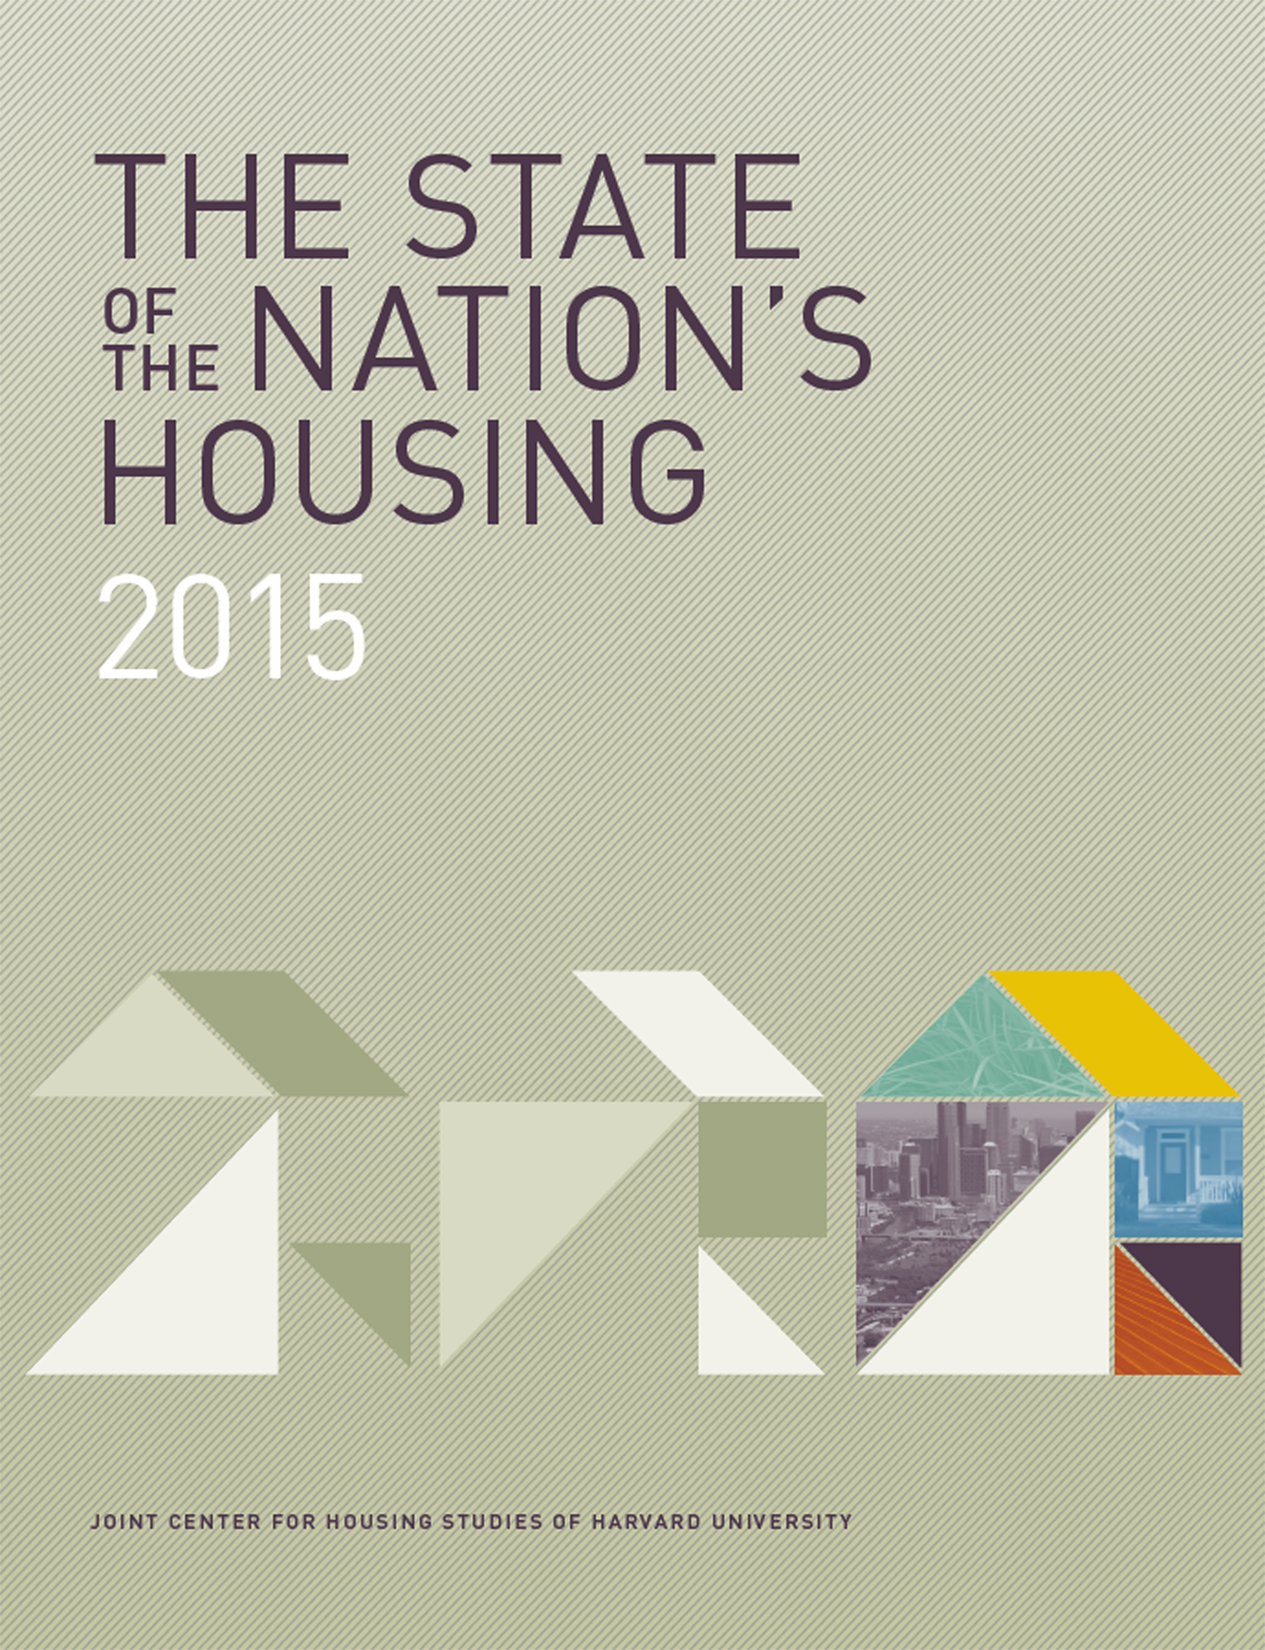 The State of the Nation's Housing